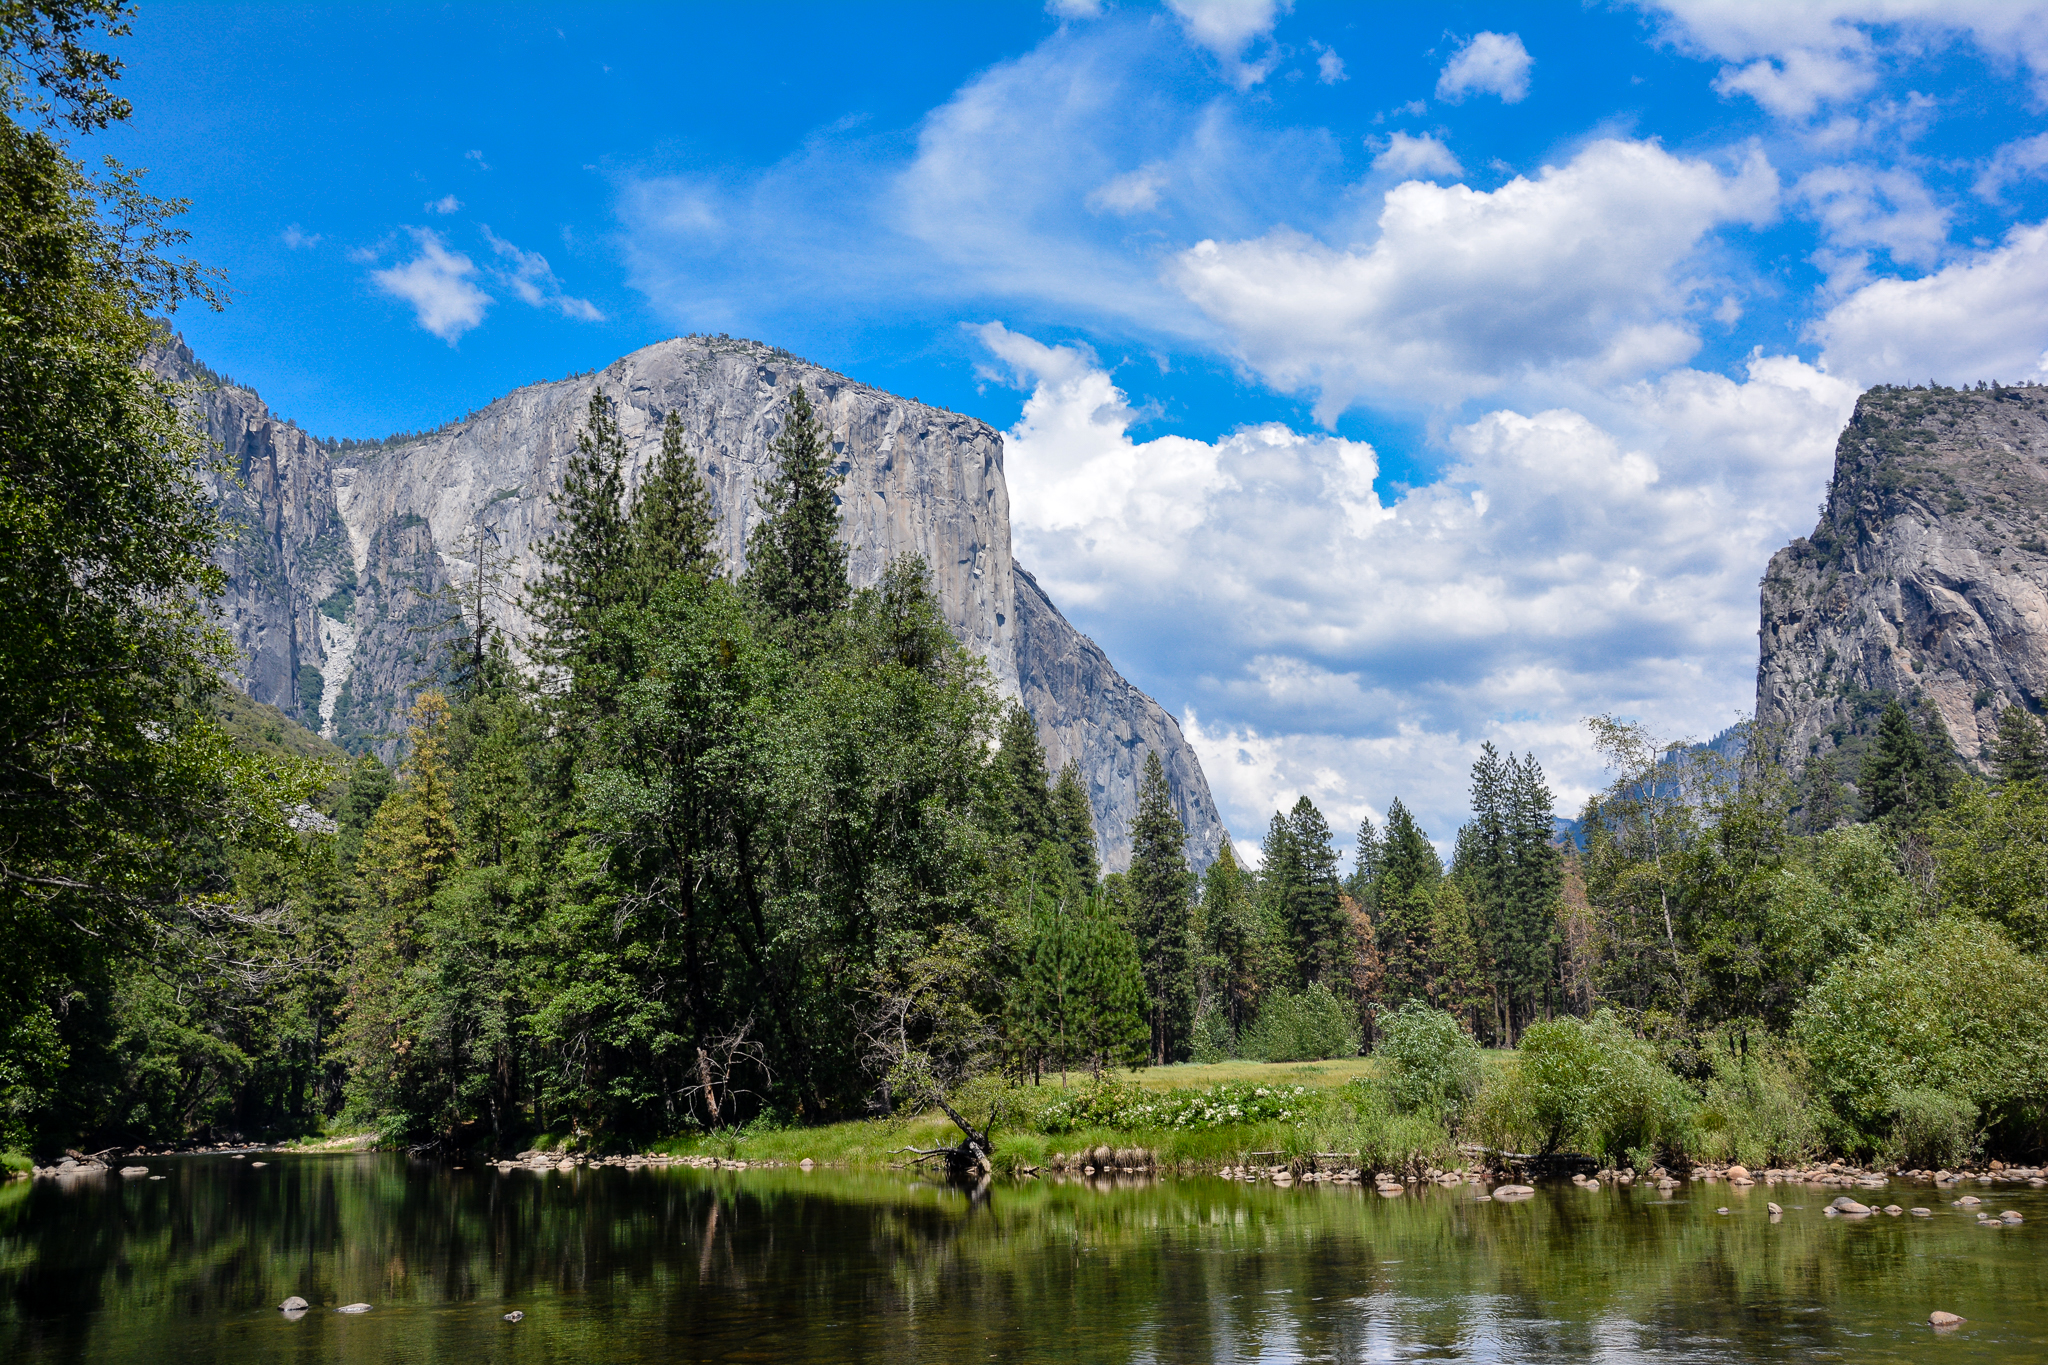 beautiful peaks of Yosemite National Park with blue skies, puffy white clouds - US National Parks by state